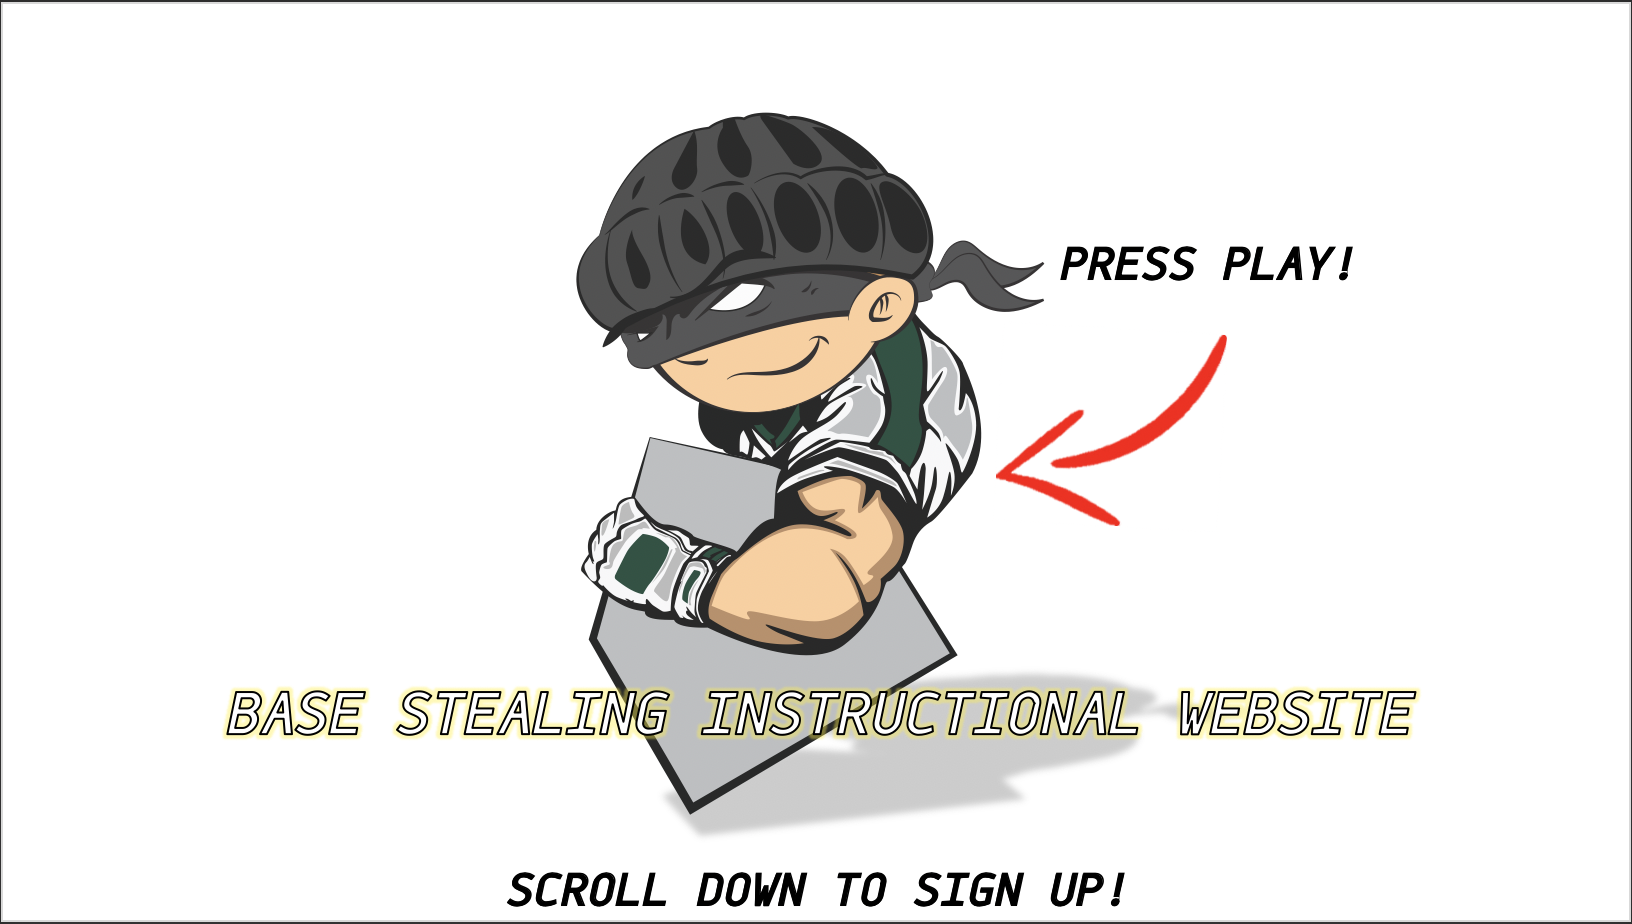 Welcome to StealBases.com